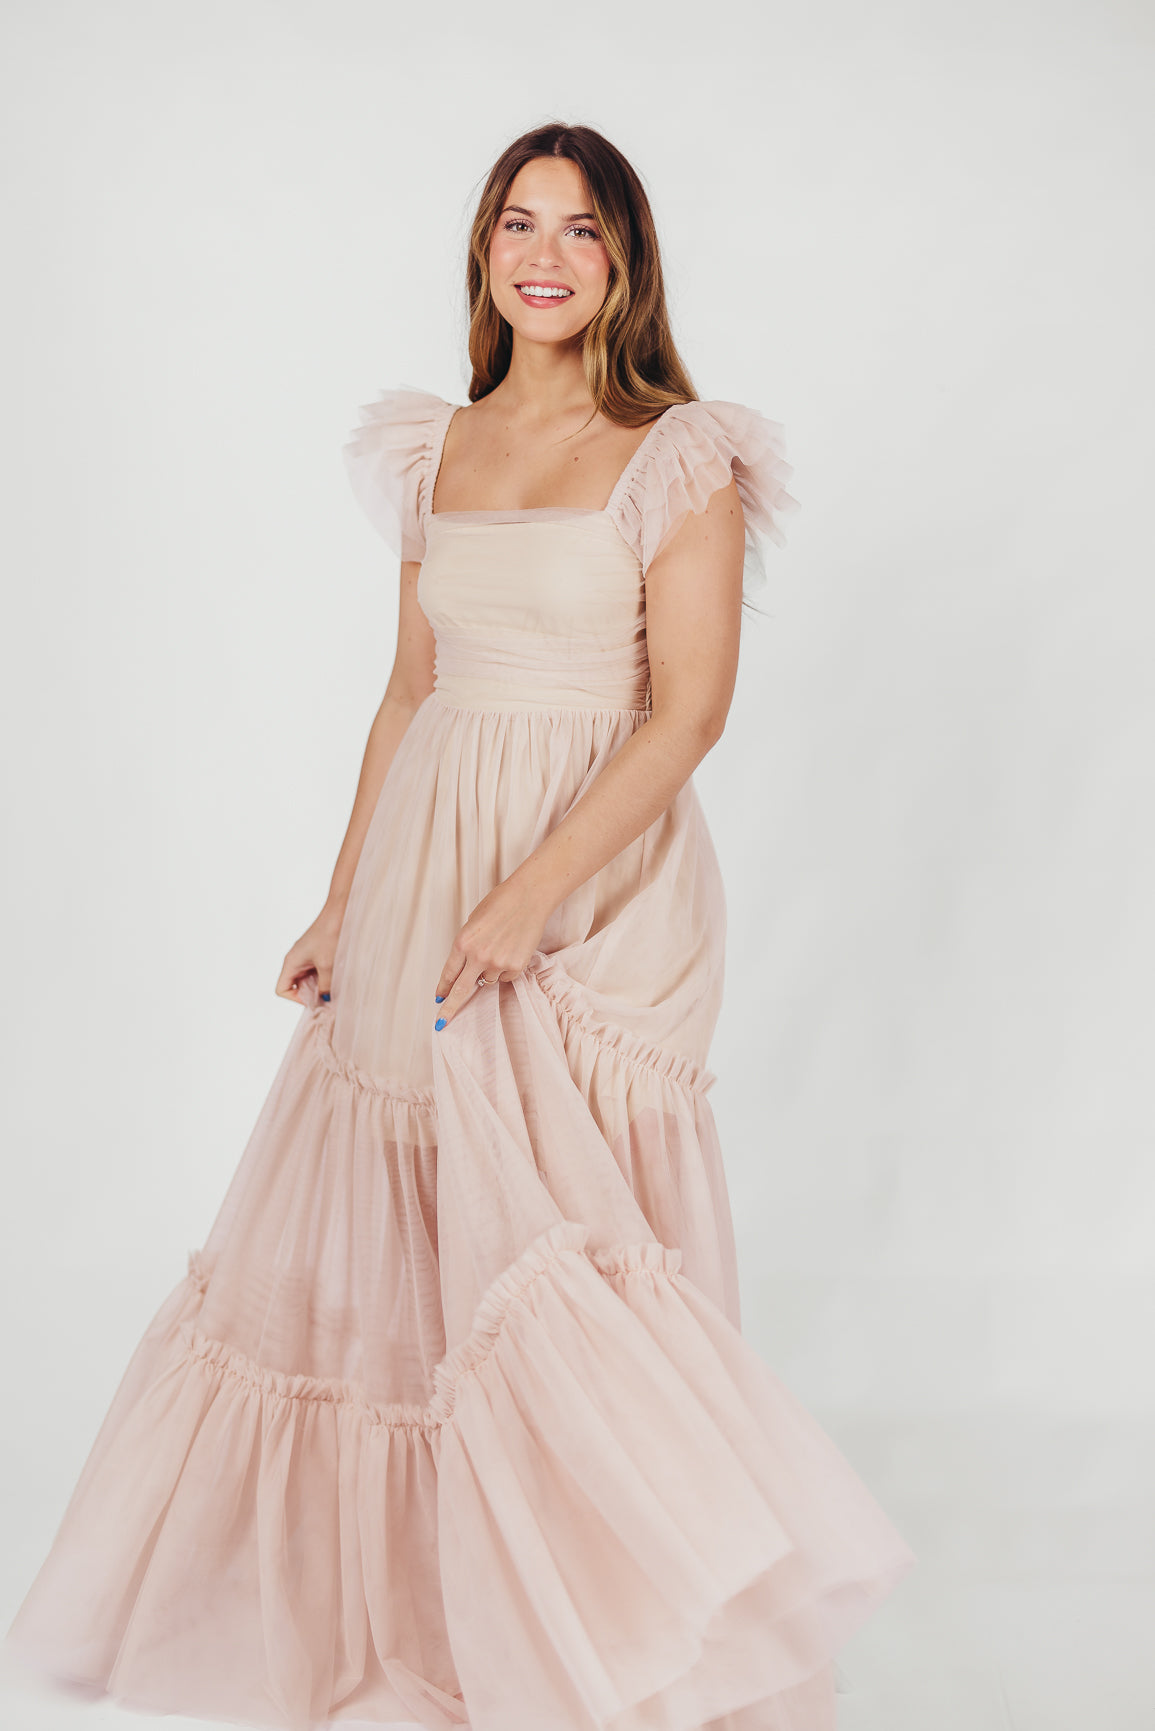 Bella Tiered Tulle Maxi Dress in Peachy Nude - Bump Friendly & Inclusive Sizing (S-3XL)